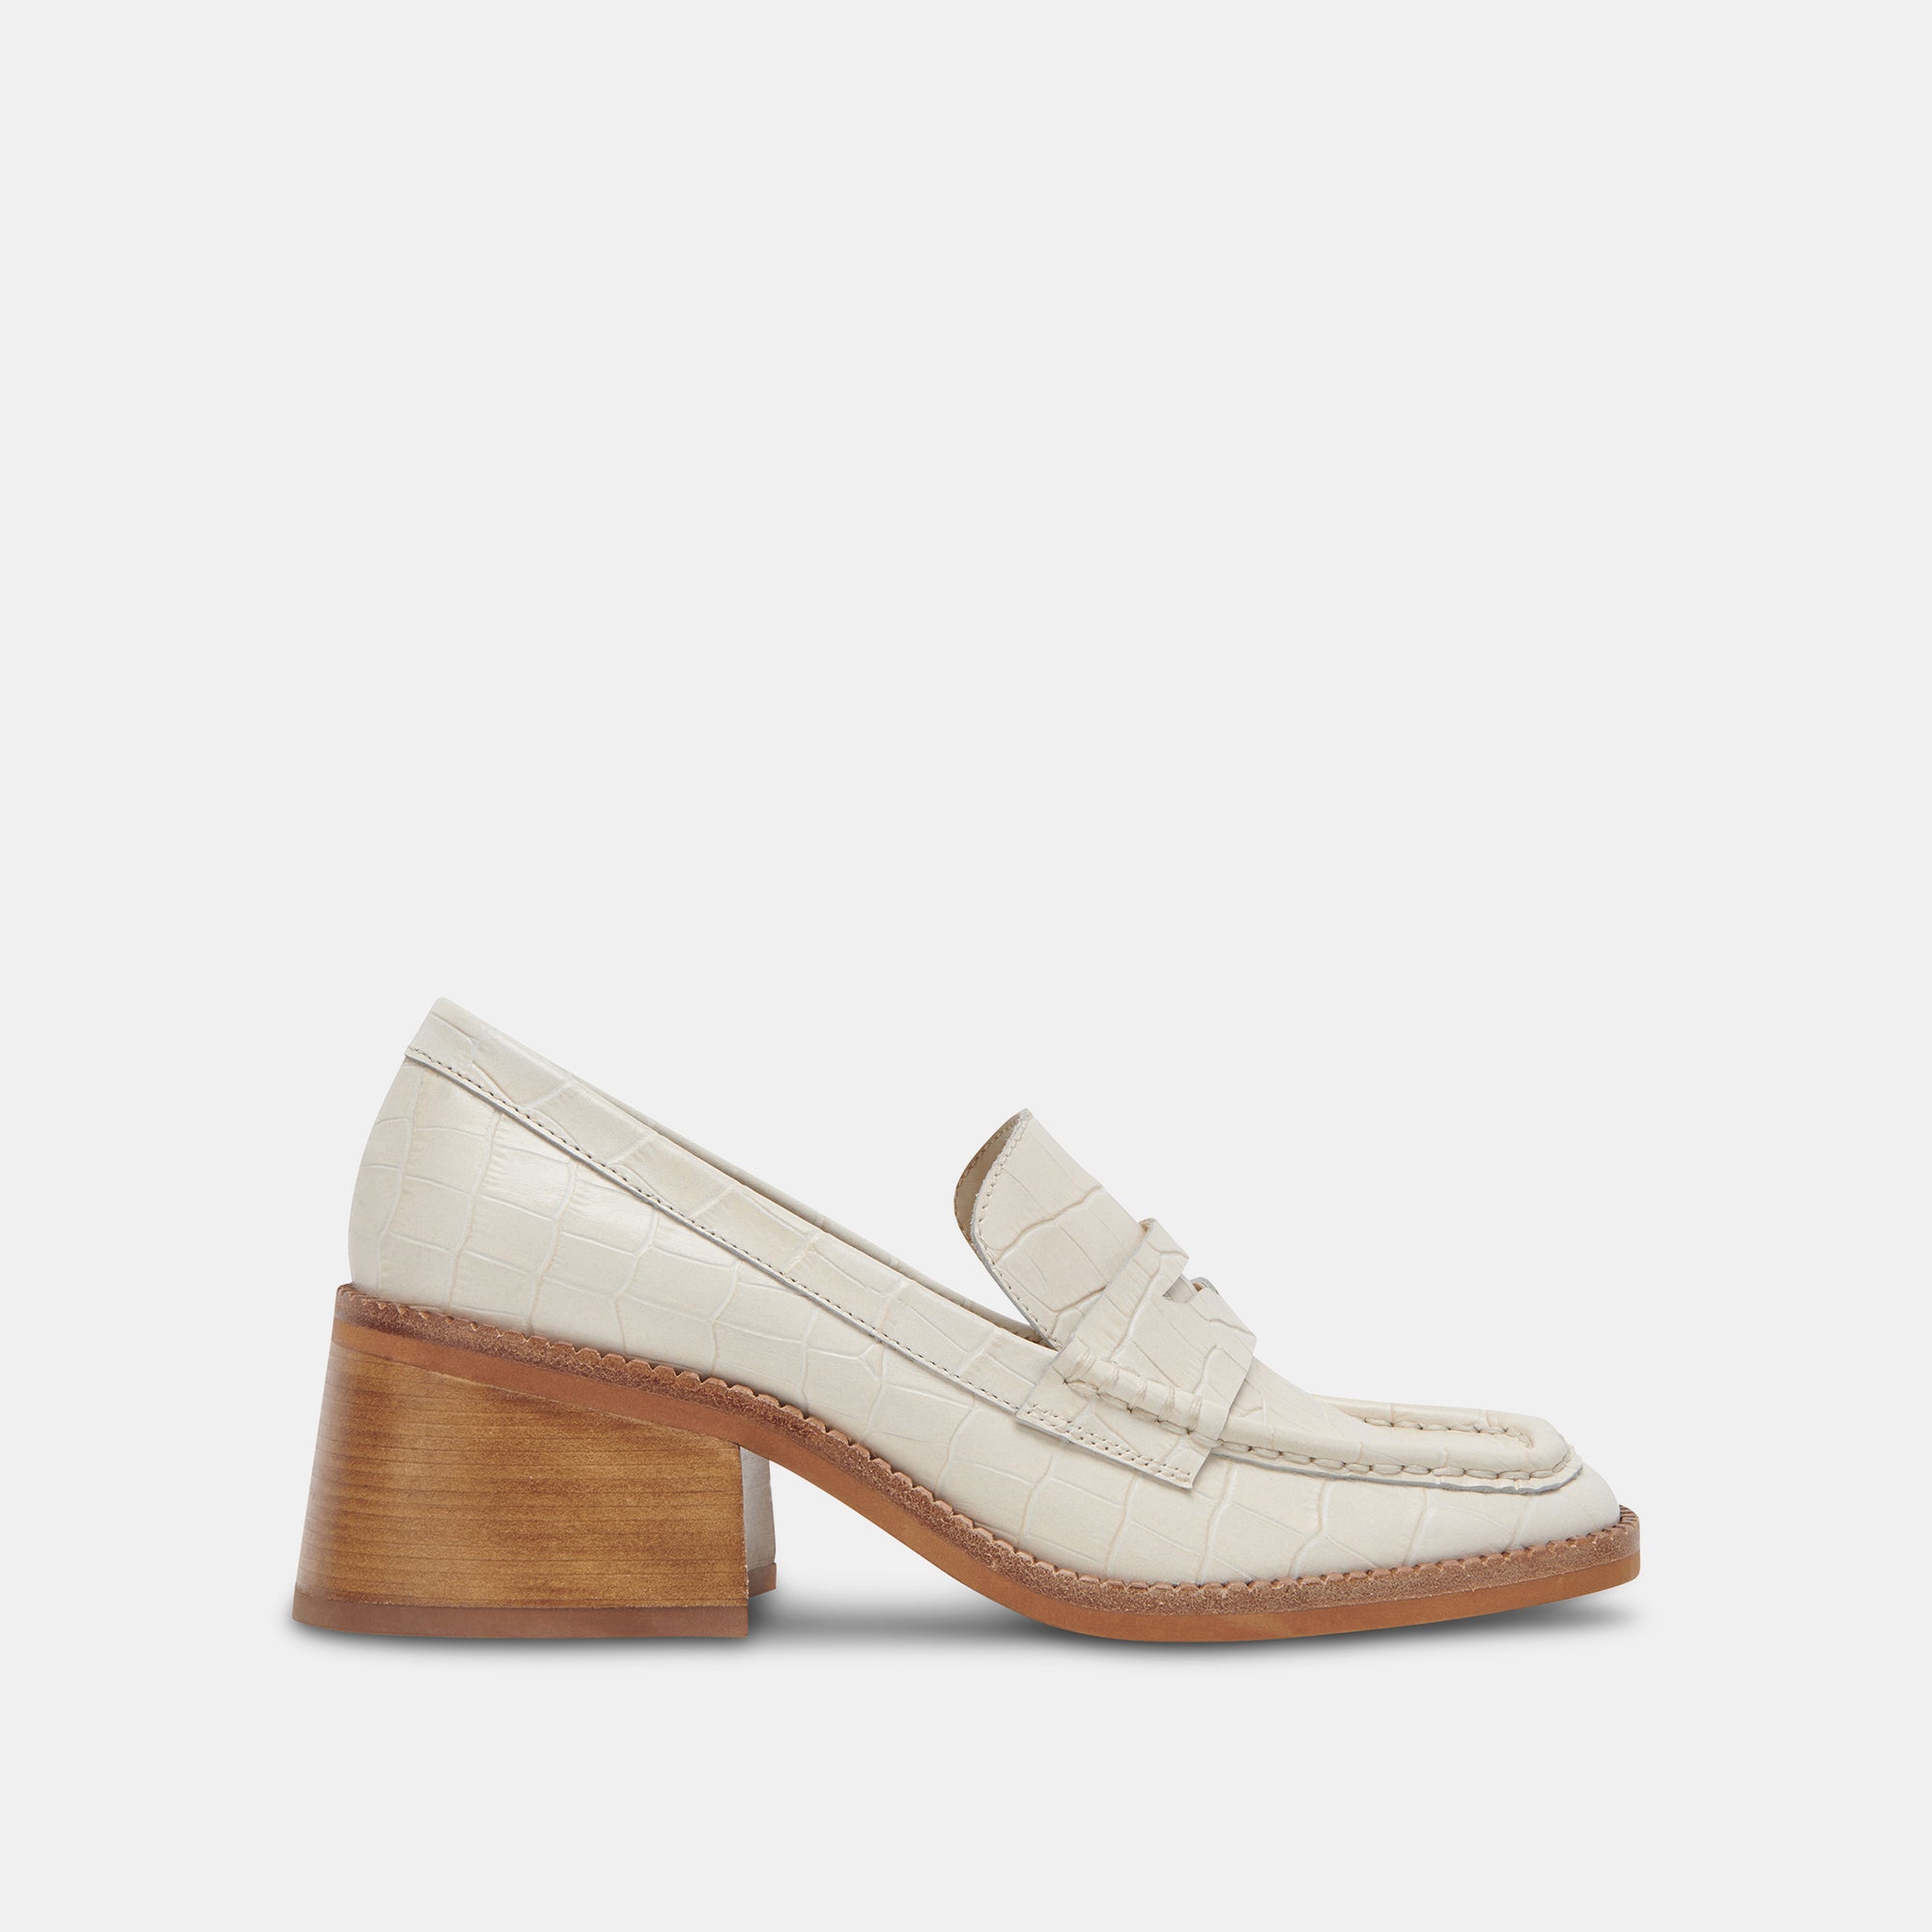 TALIE LOAFERS IVORY EMBOSSED LEATHER – Dolce Vita